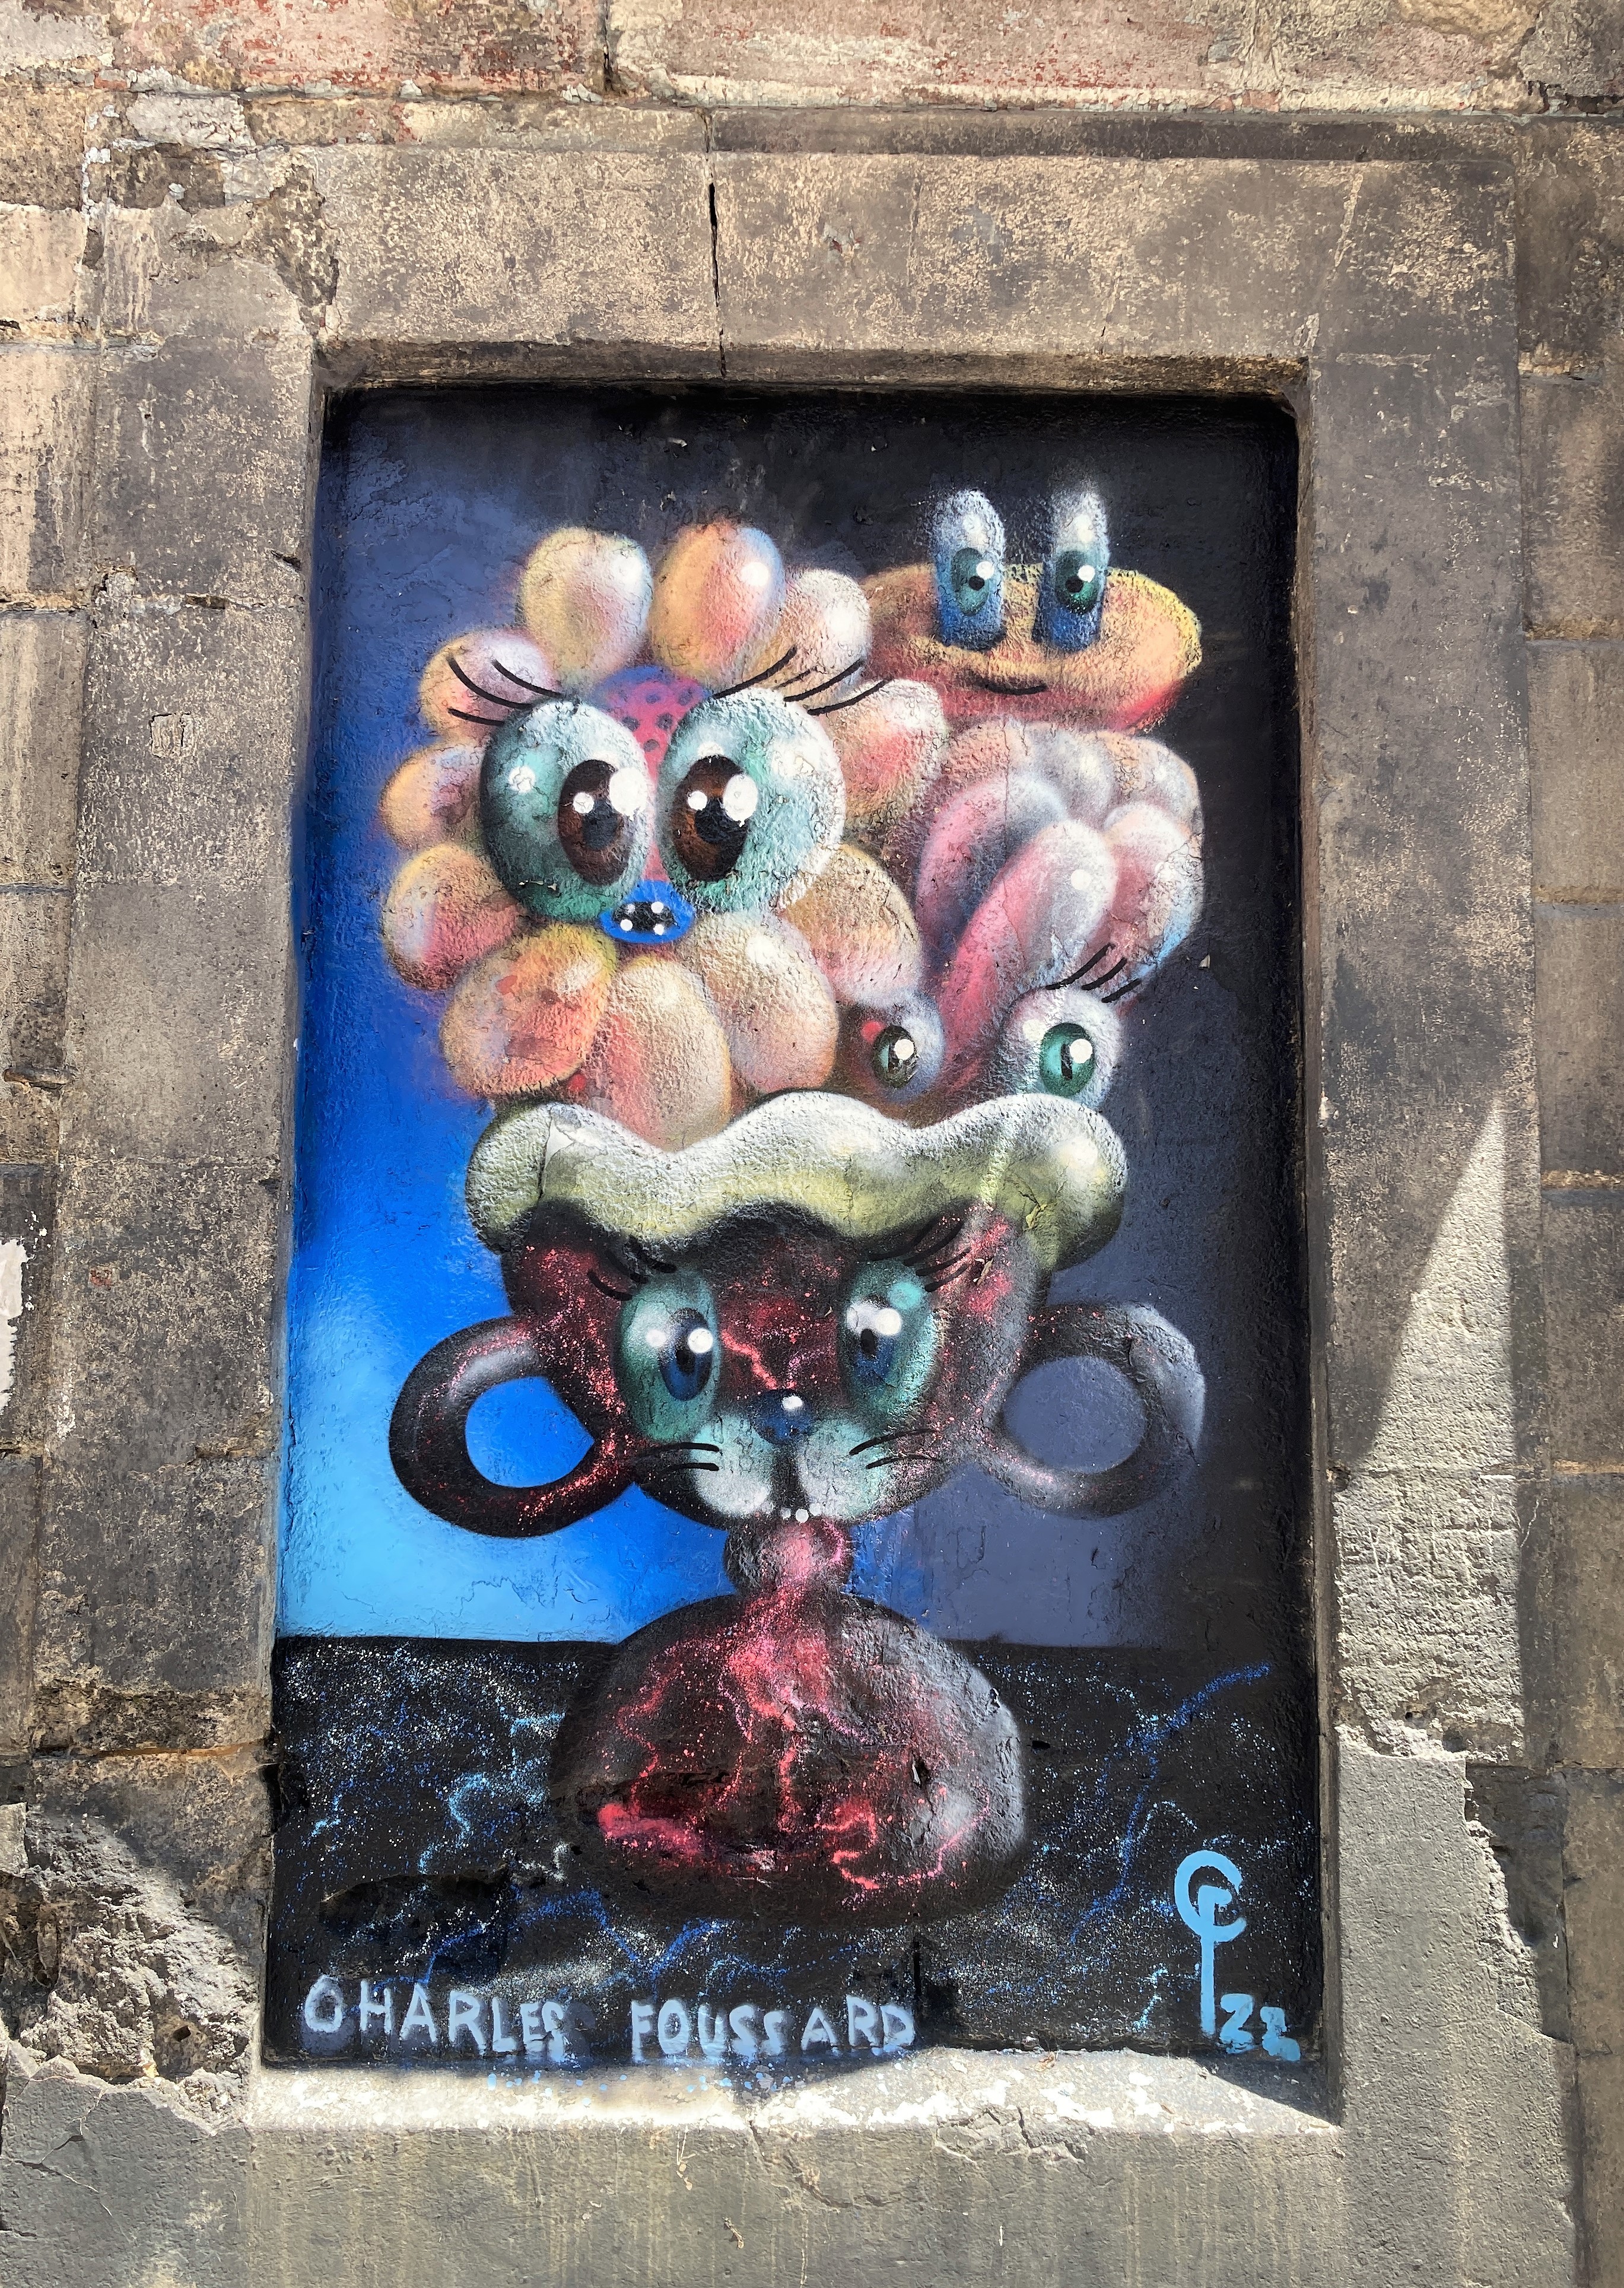 Graffiti 6855  by the artist Charles Foussard captured by Mephisroth in Bordeaux France